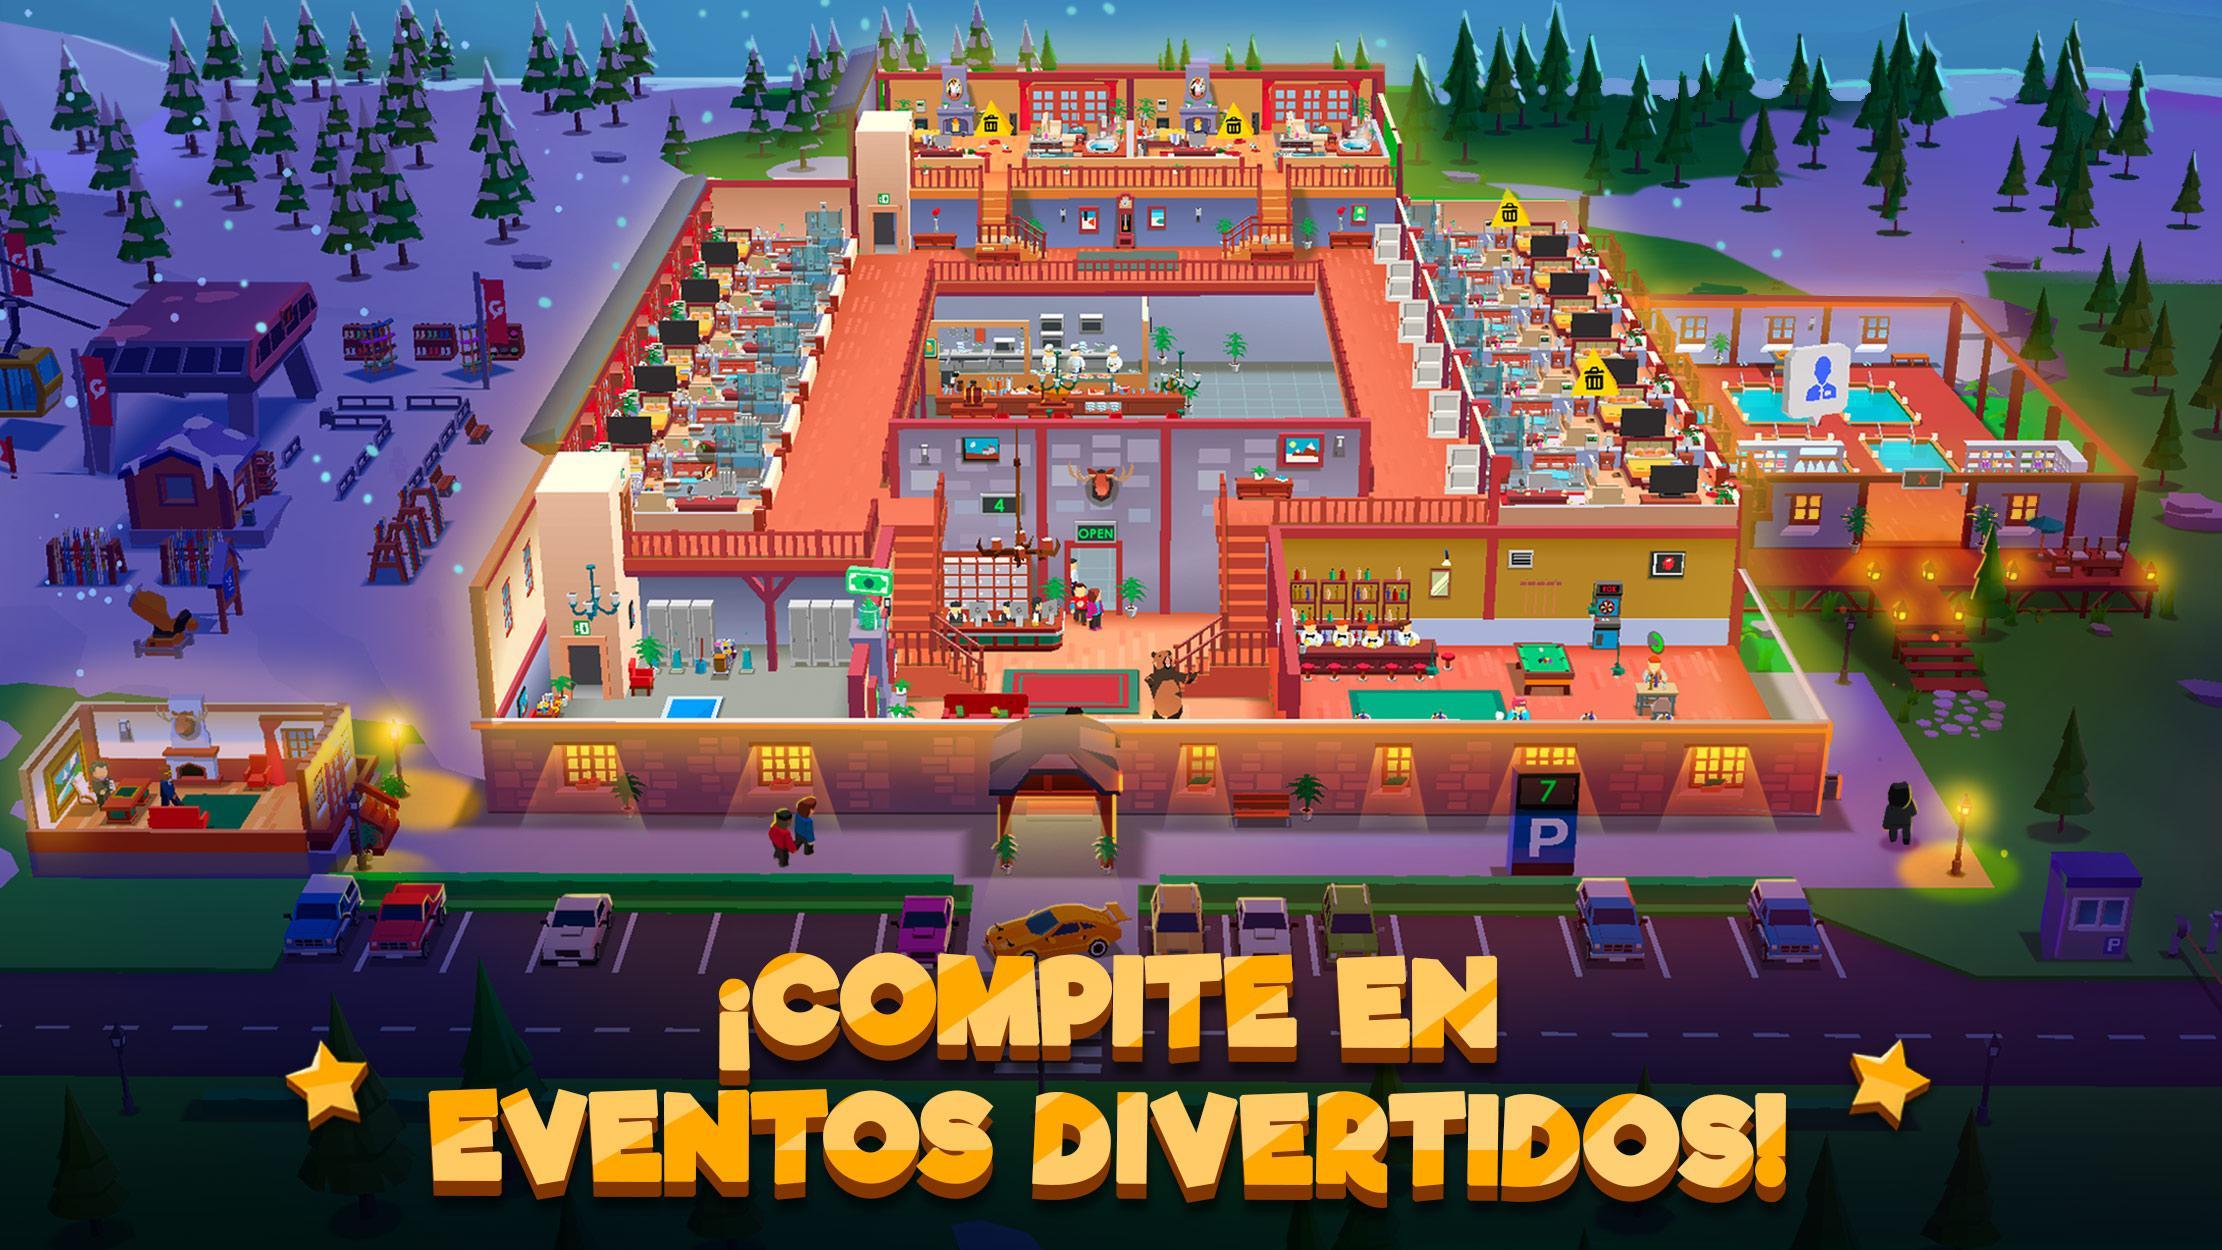 Hotel Empire Tycoon－Idle Game – Apps no Google Play